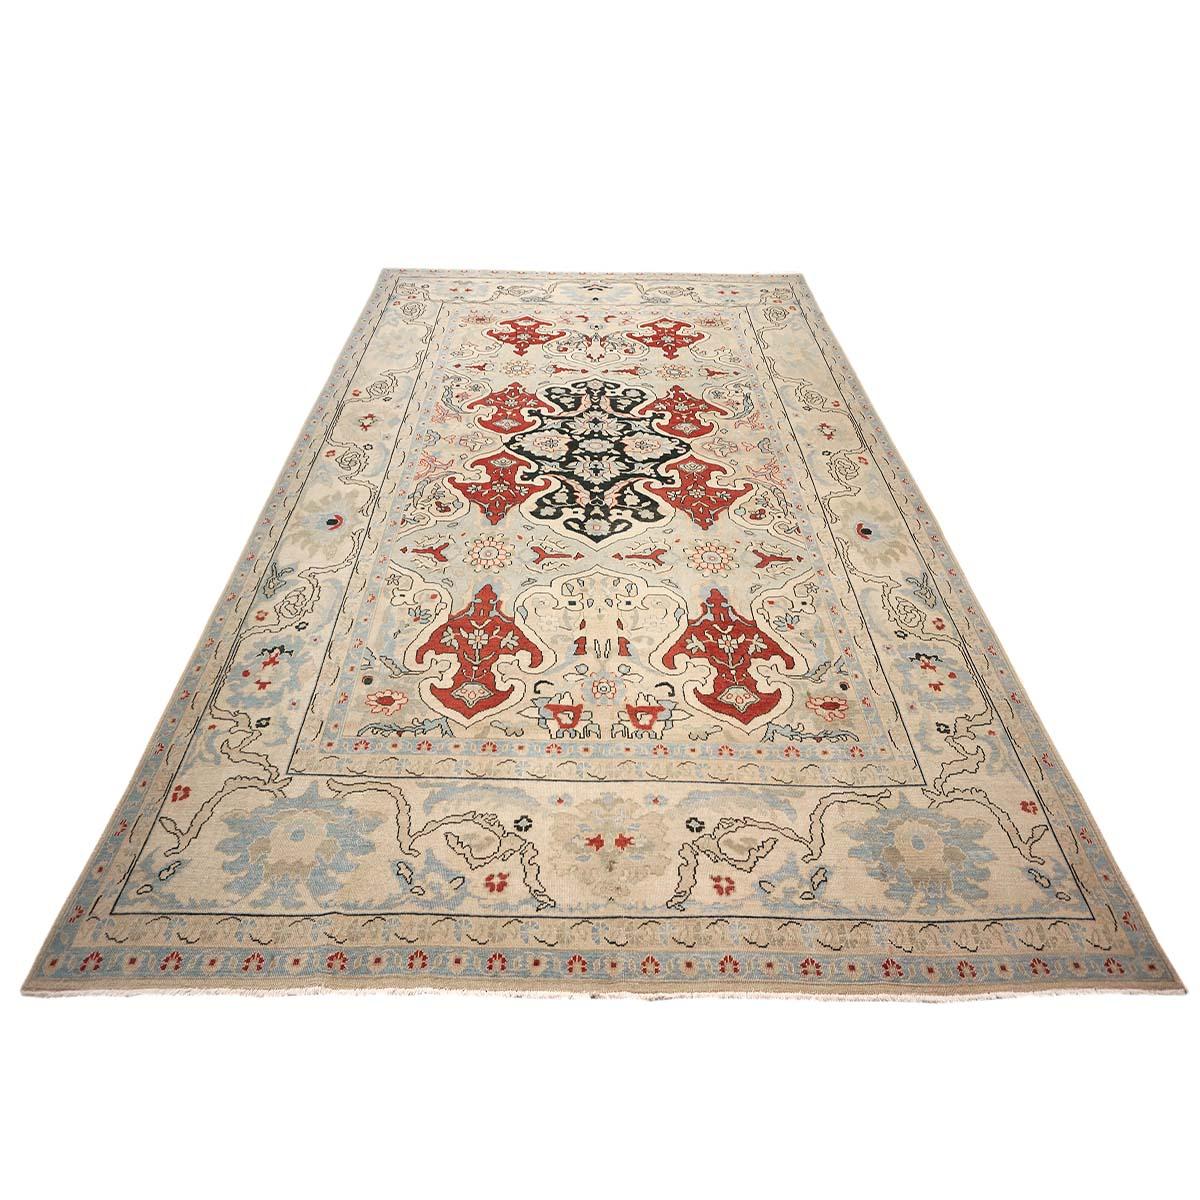 Ashly Fine Rugs presents an antique recreation of an original Persian Sultanabad room-sized area rug. Part of our own previous production, this antique recreation was thought of and created in-house and handmade in Iran by our master weavers.